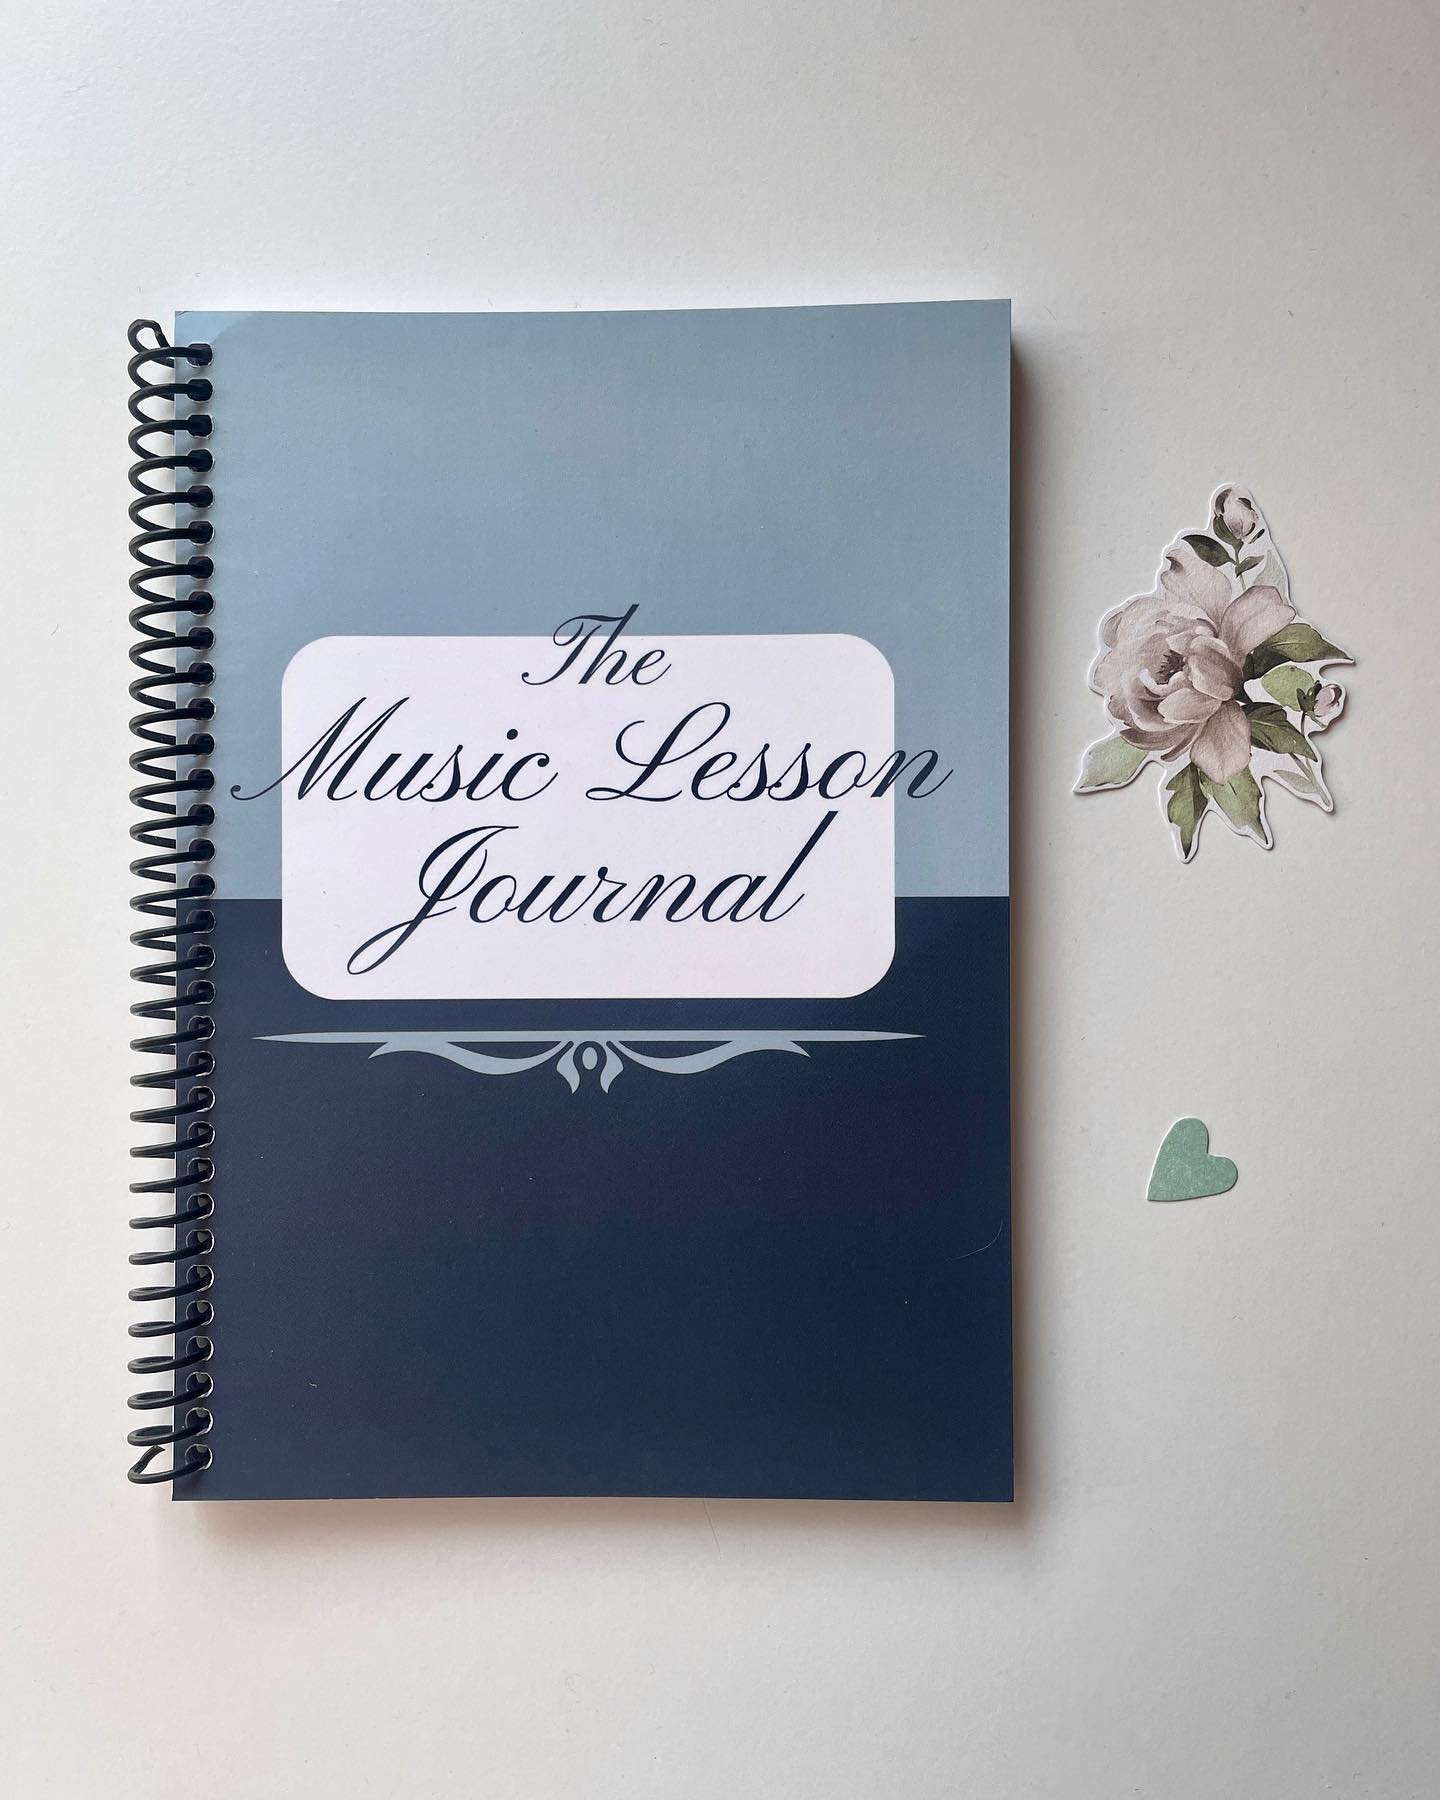 Our current best seller! Perfect for any musician looking to keep lesson notes 🎶💙